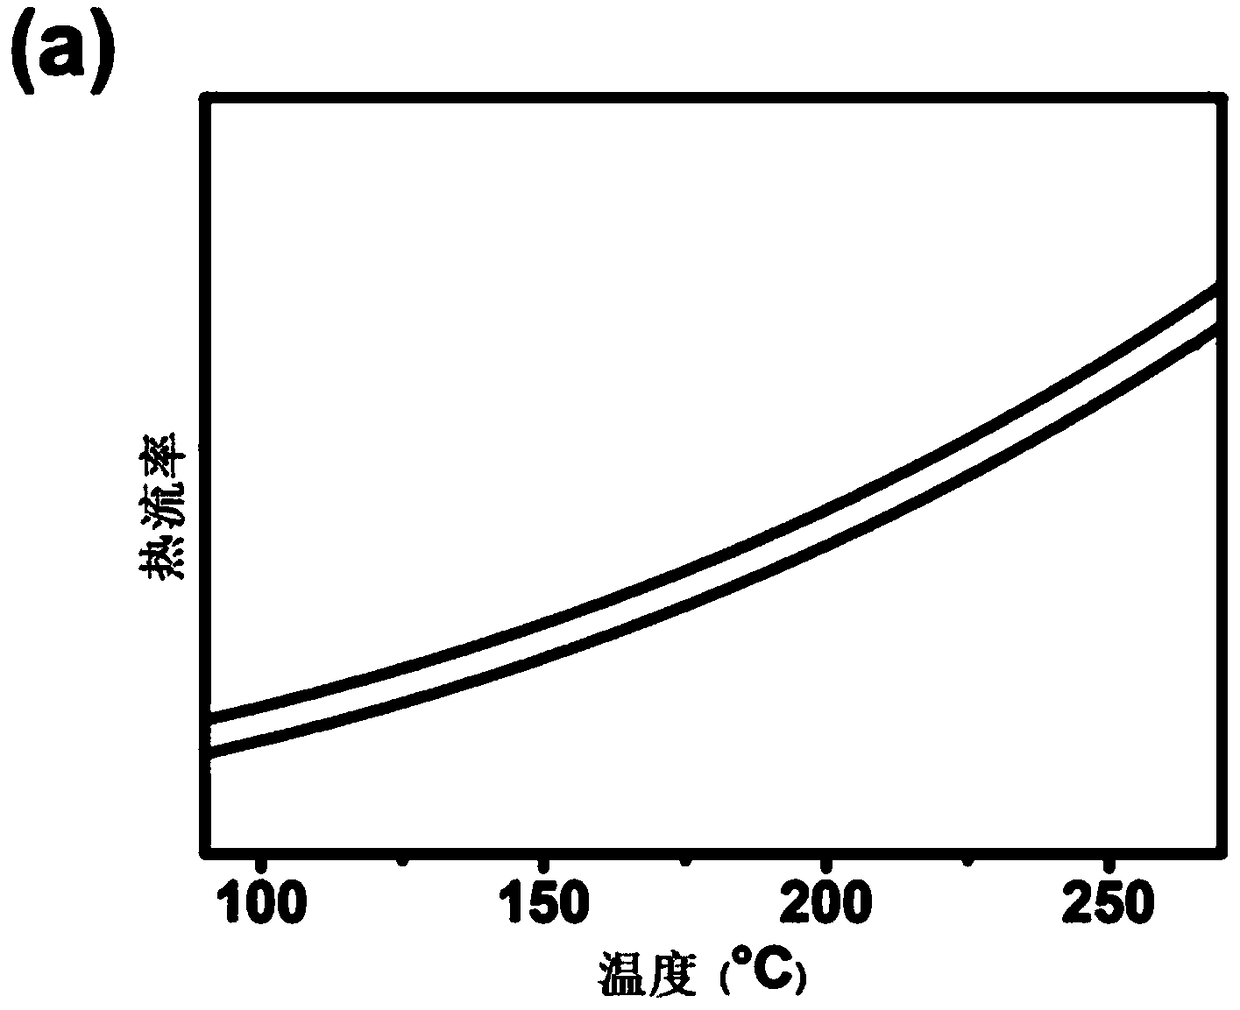 Perylene diimide hexamer compound and preparation method, composition and organic solar cell